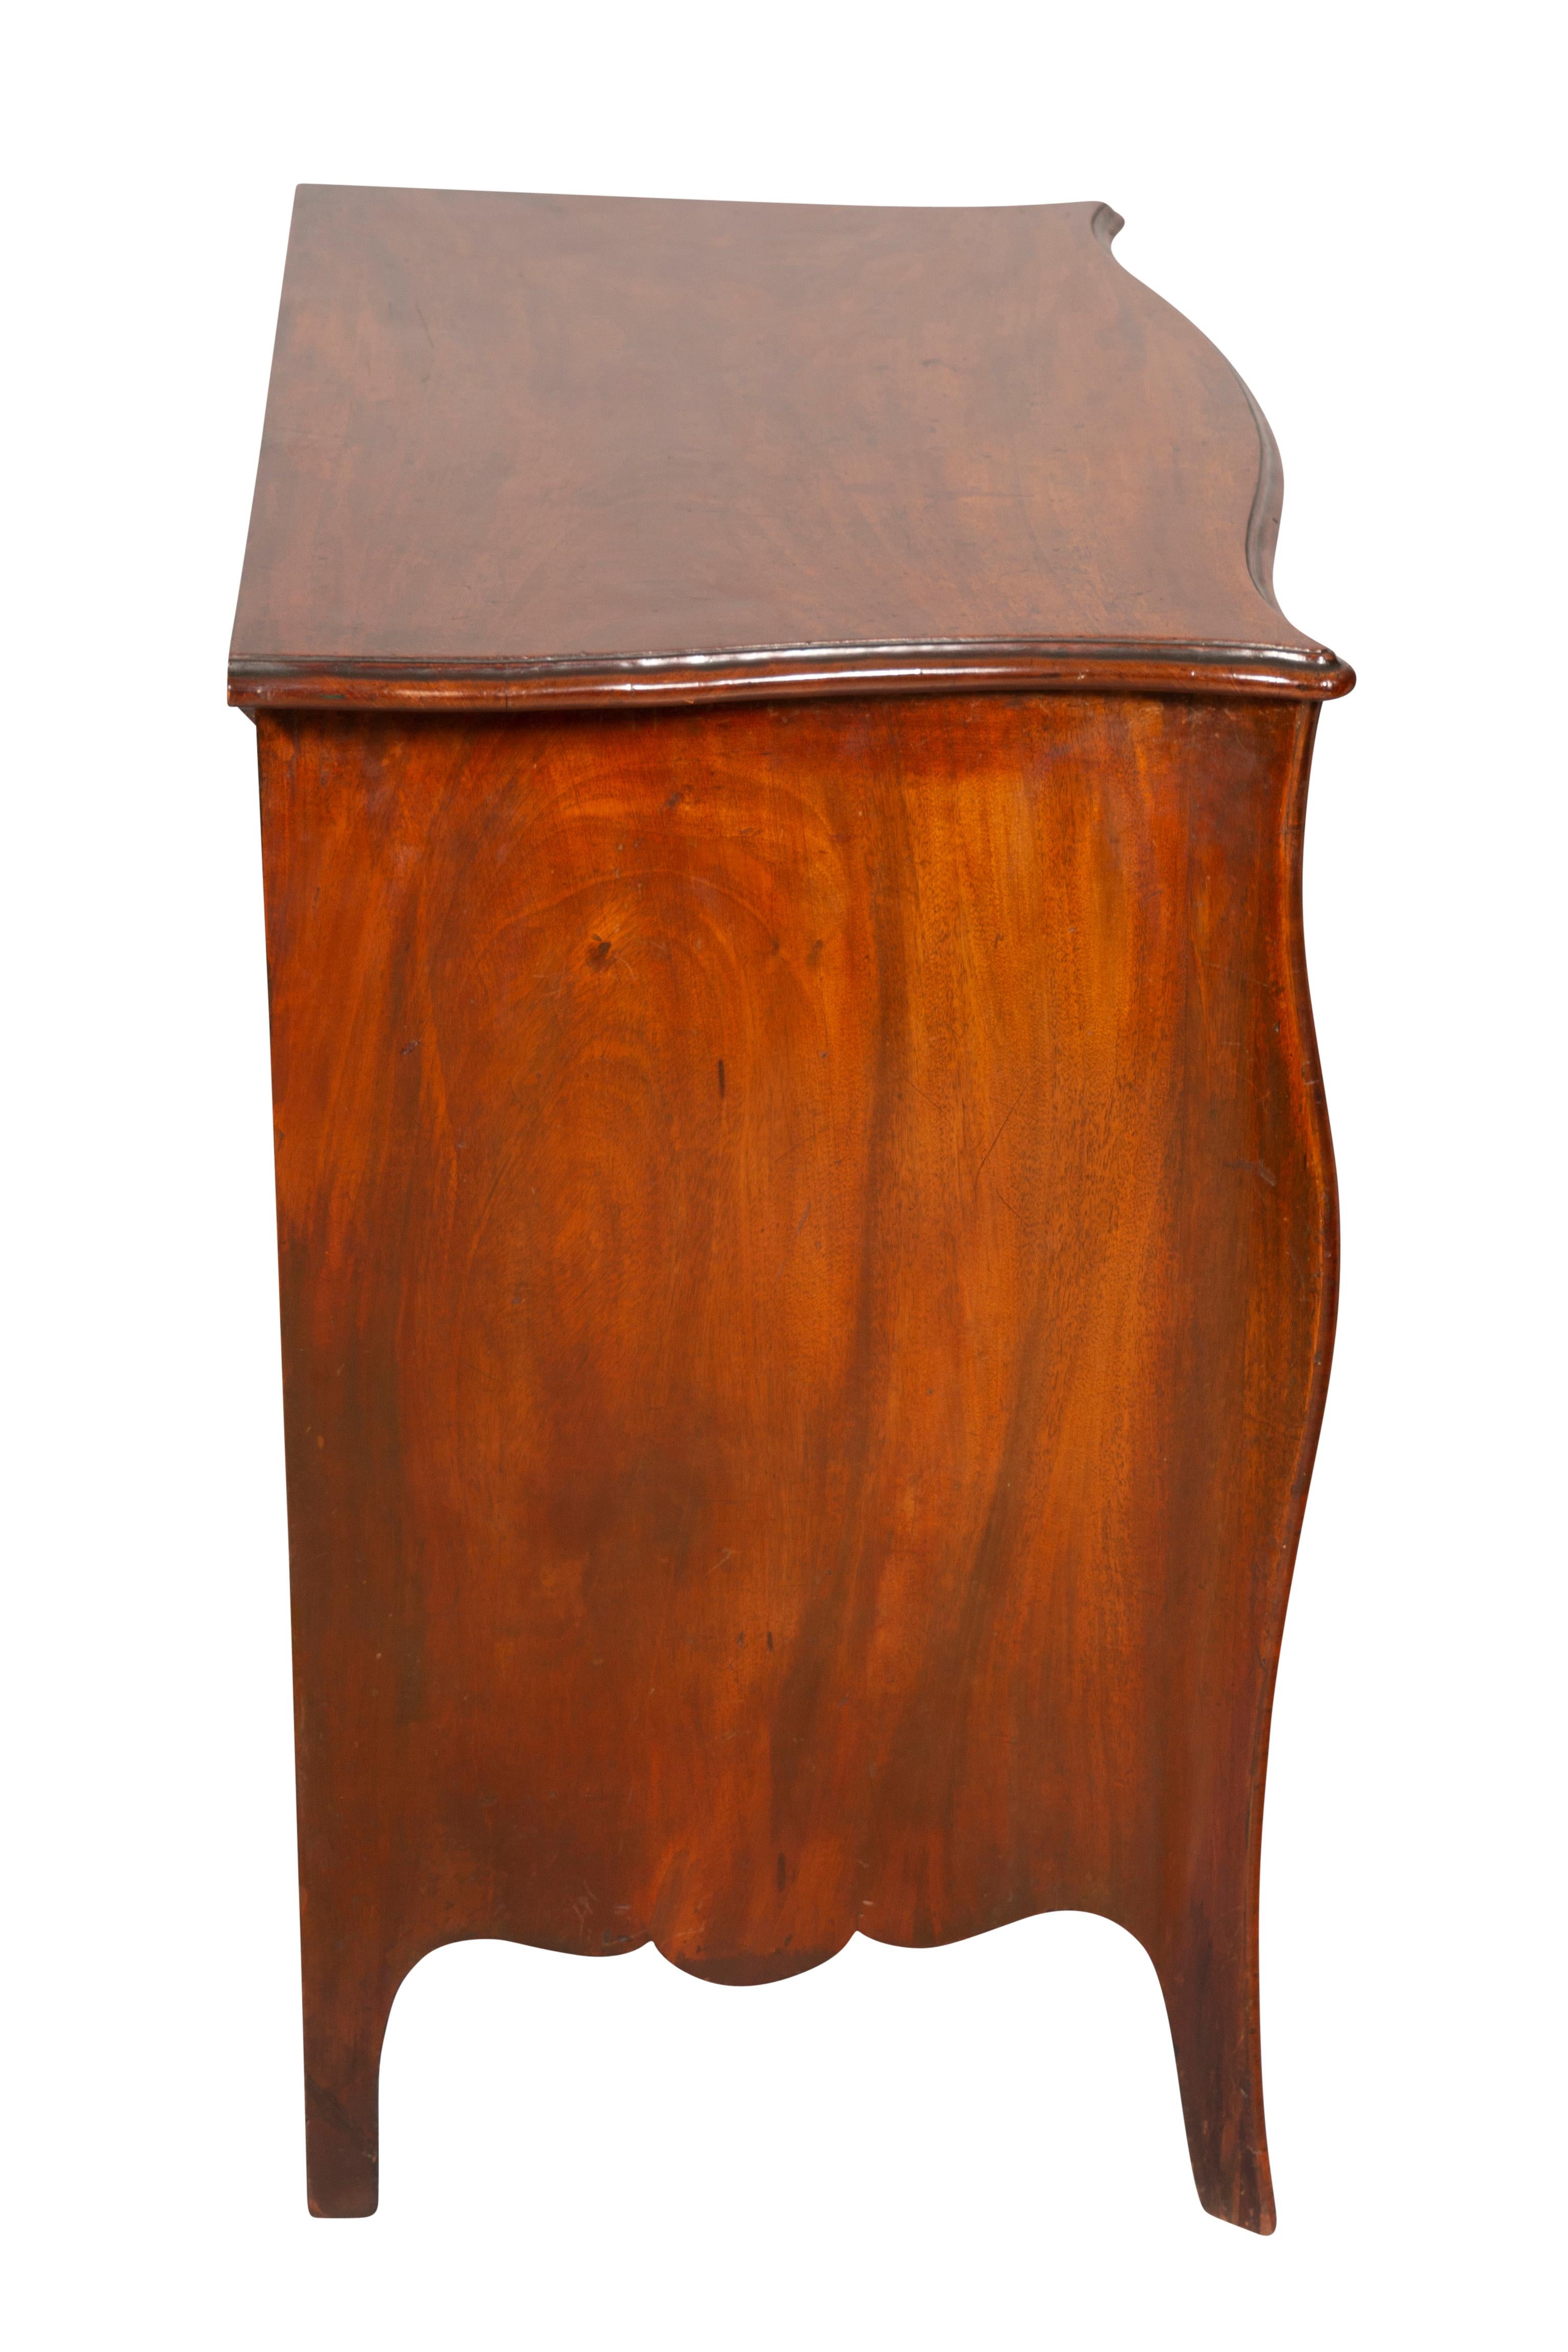 Late 18th Century George III Mahogany Chest of Drawers For Sale